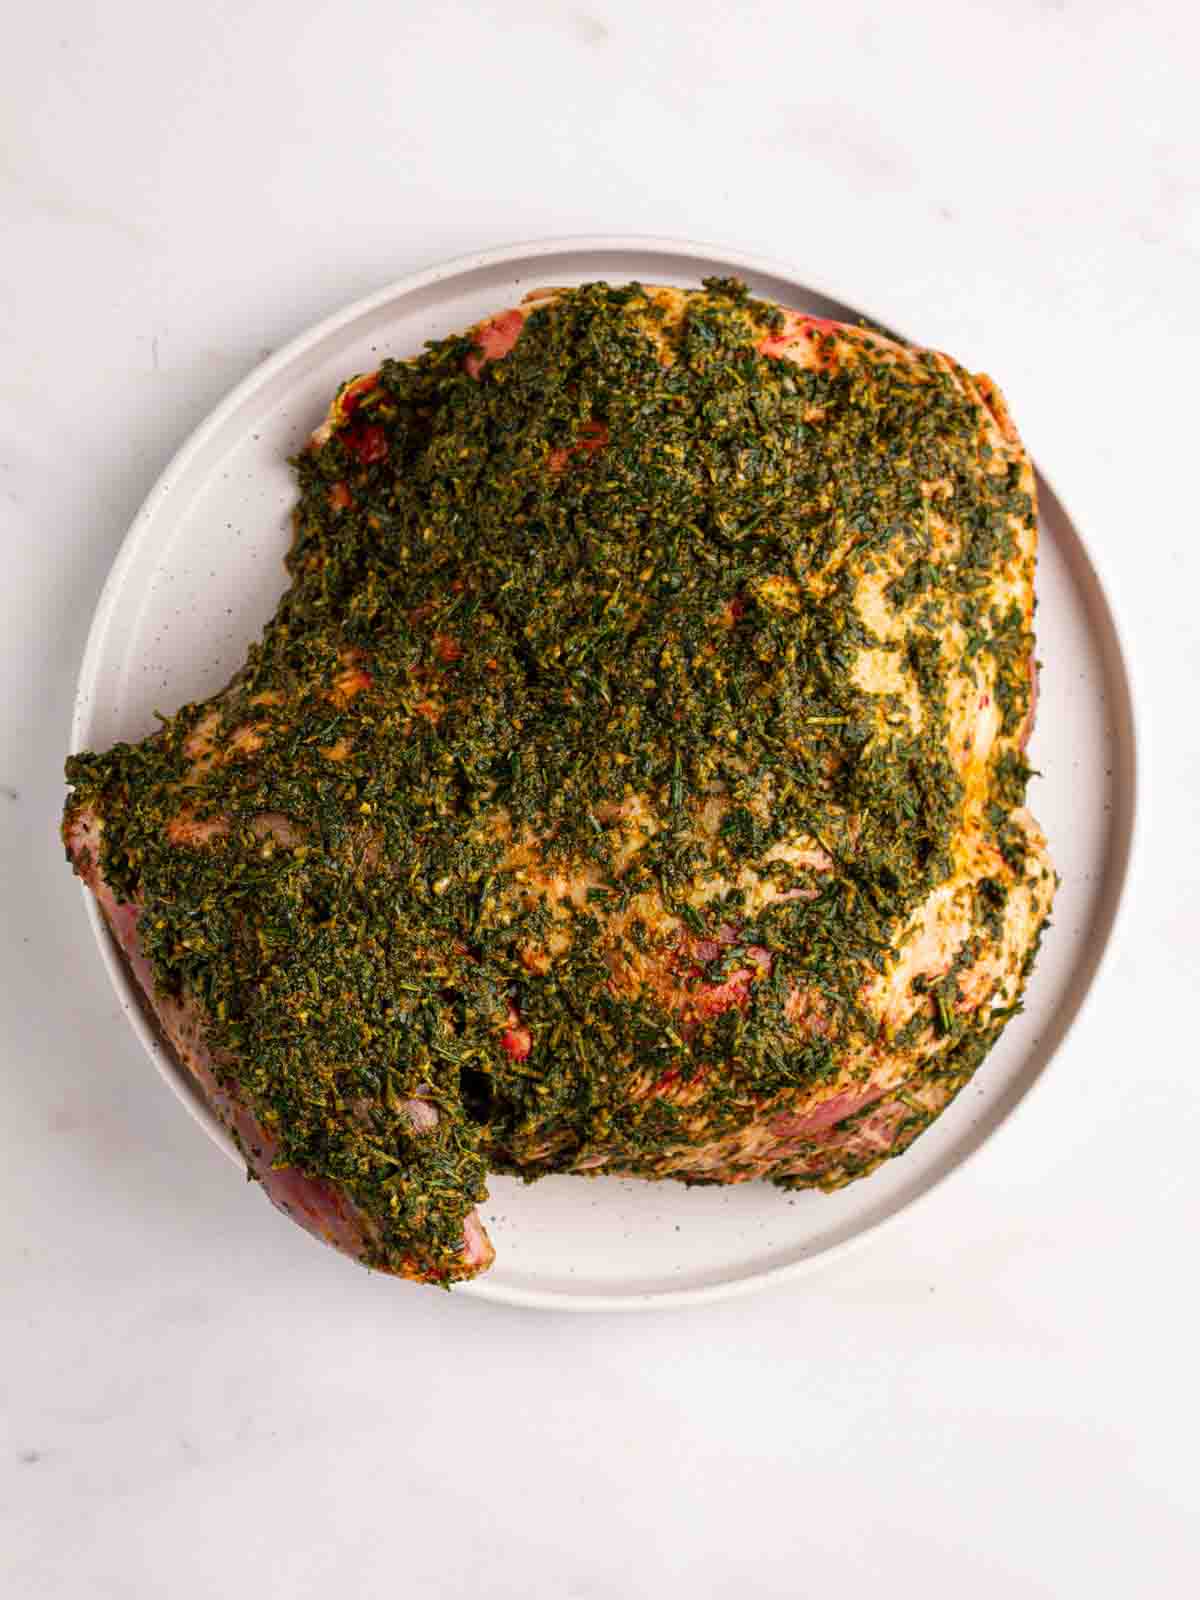 A raw shoulder of lamb with a green herby crust on top on a plate, ready to go in the oven for the recipe Slow Roasted Lamb Shoulder.